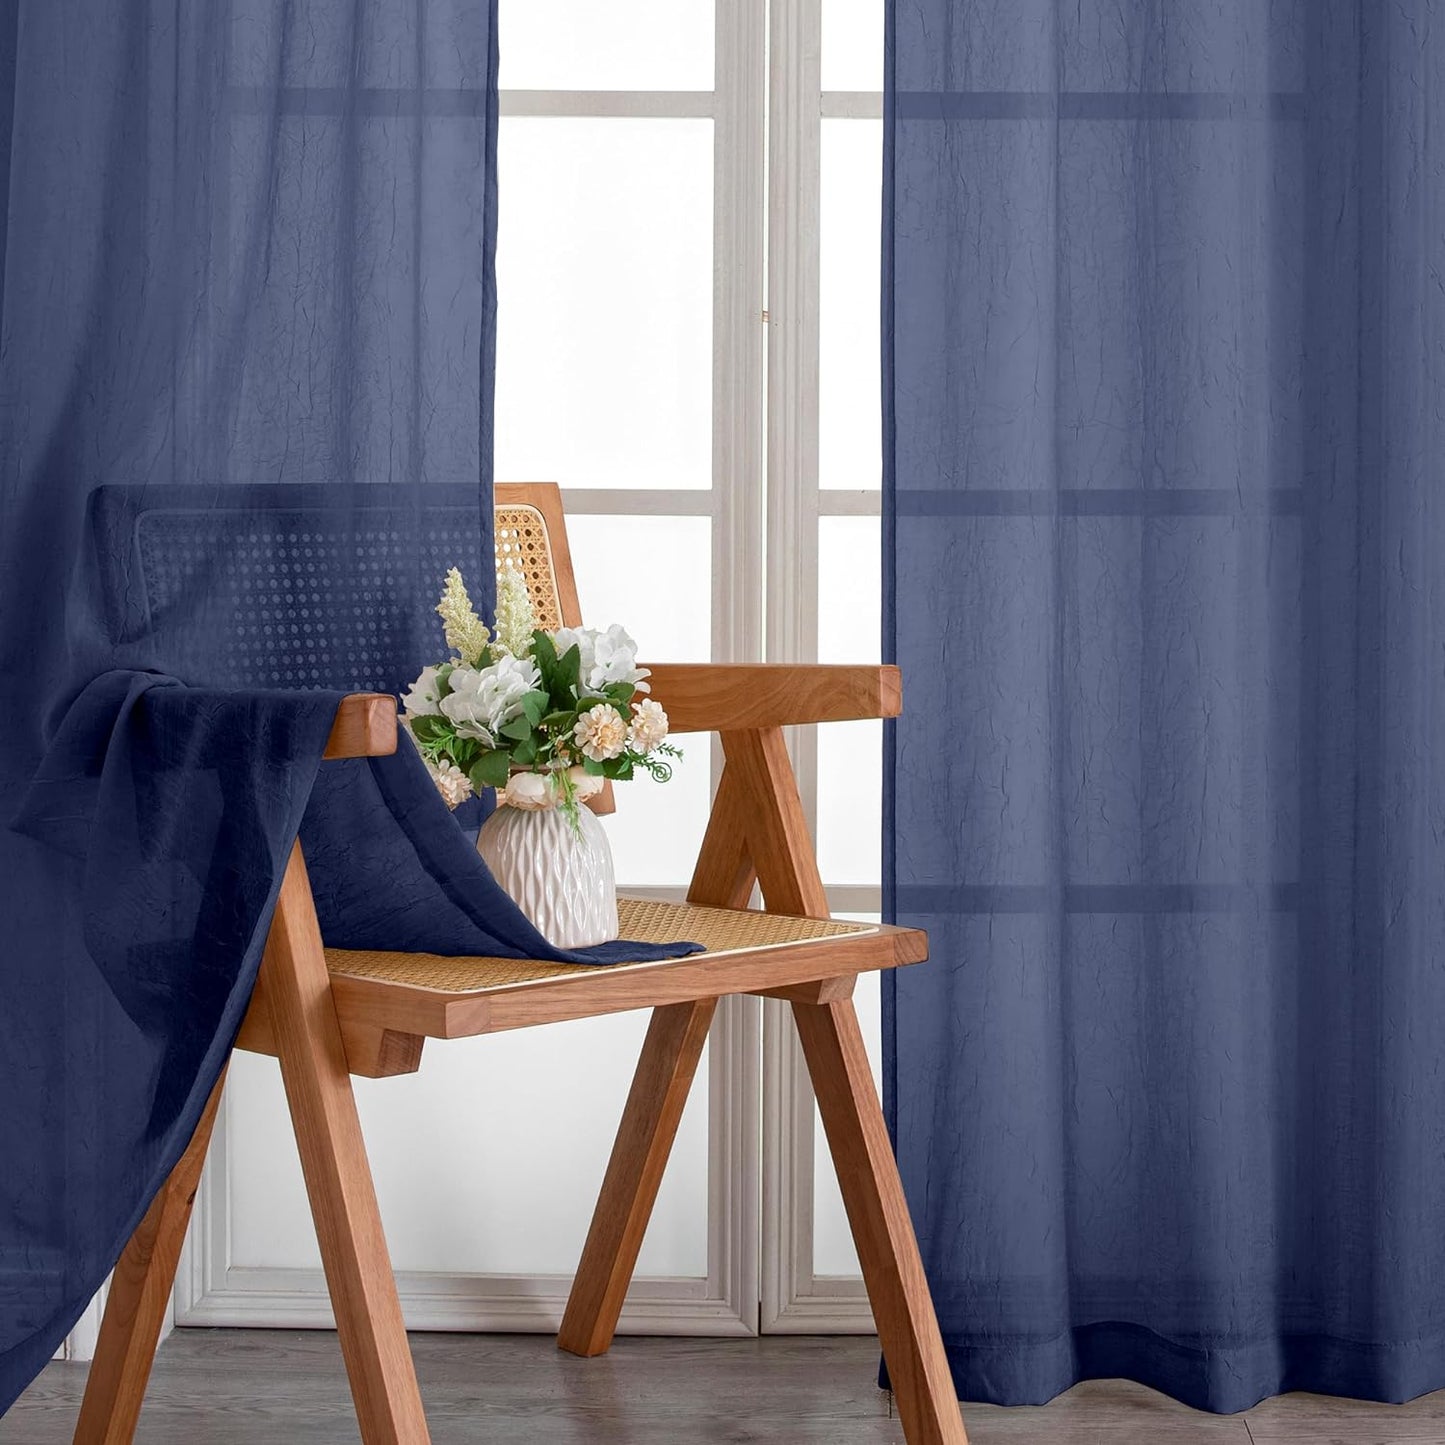 Chyhomenyc Crushed White Sheer Valances for Window 14 Inch Length 2 PCS, Crinkle Voile Short Kitchen Curtains with Dual Rod Pockets，Gauzy Bedroom Curtain Valance，Each 42Wx14L Inches  Chyhomenyc Navy Blue 42 W X 72 L 